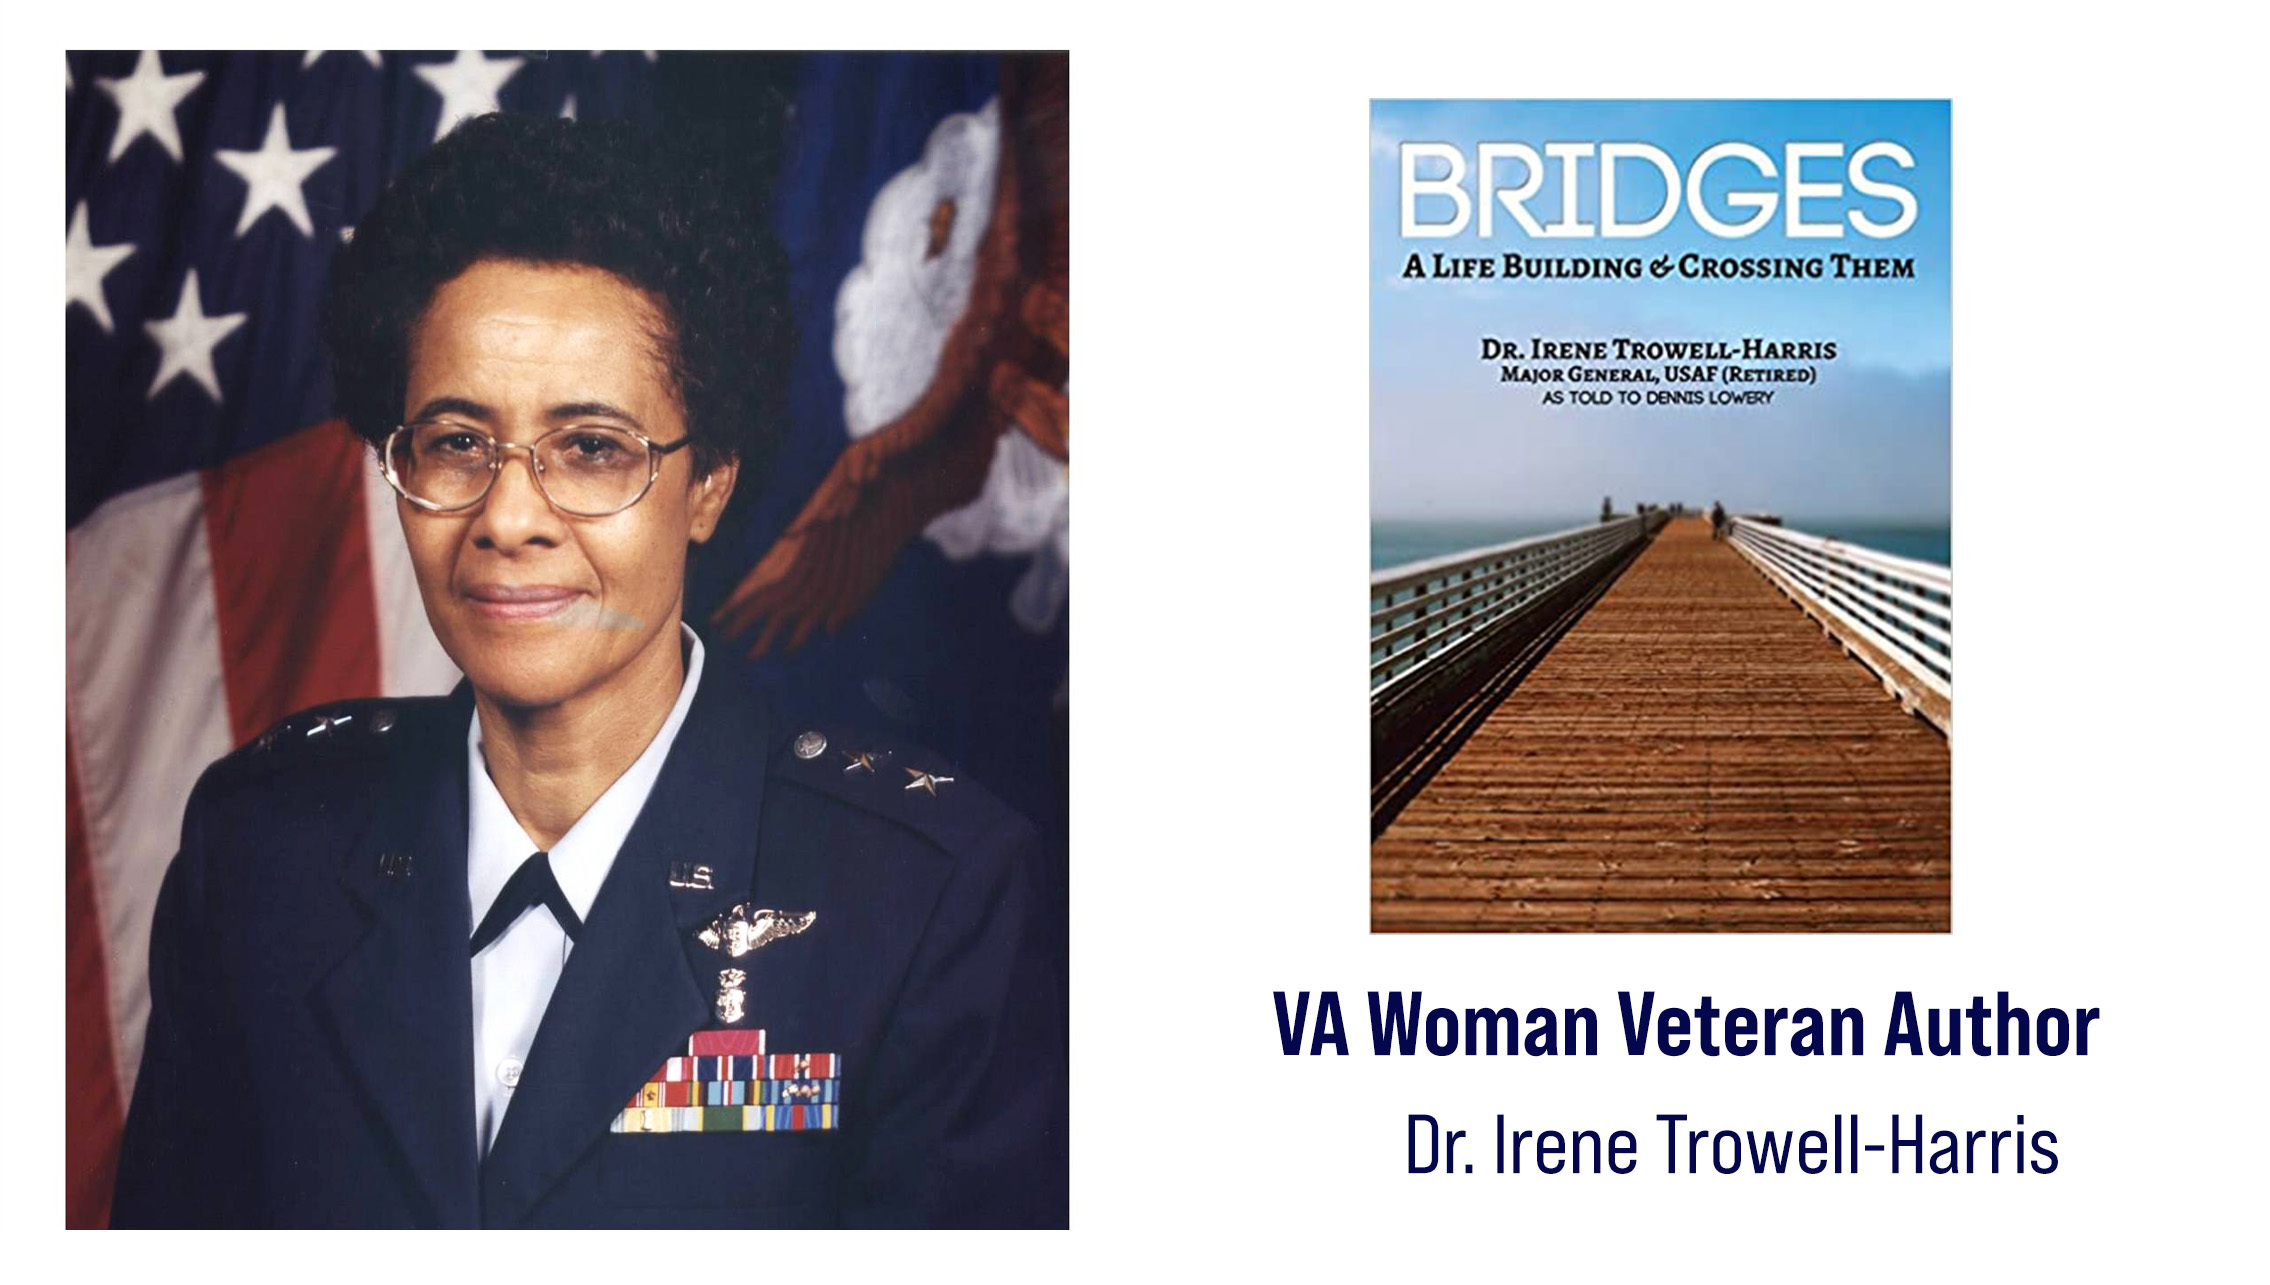 Air Force Veteran Irene Trowell-Harris is a woman Veteran author who wrote “Bridges: A Life Building and Crossing Them" about her life.